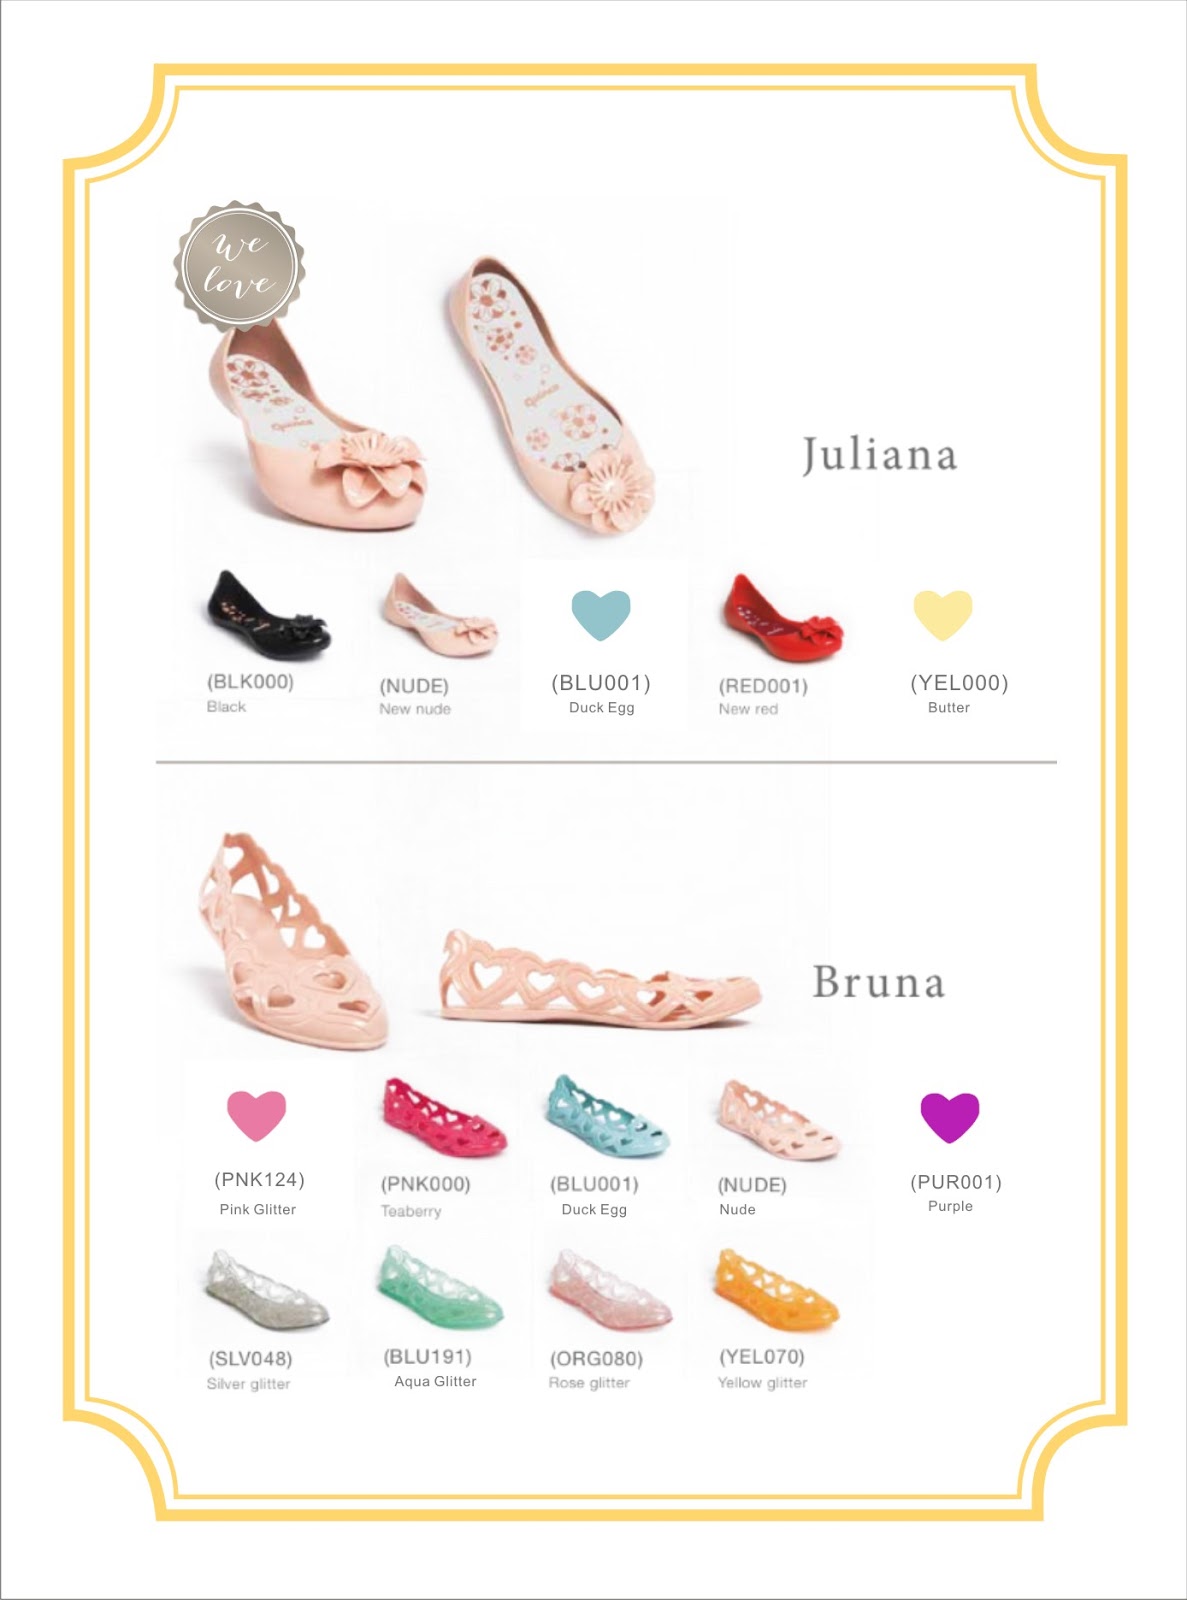 Jelly Bunny Shoes Size Chart